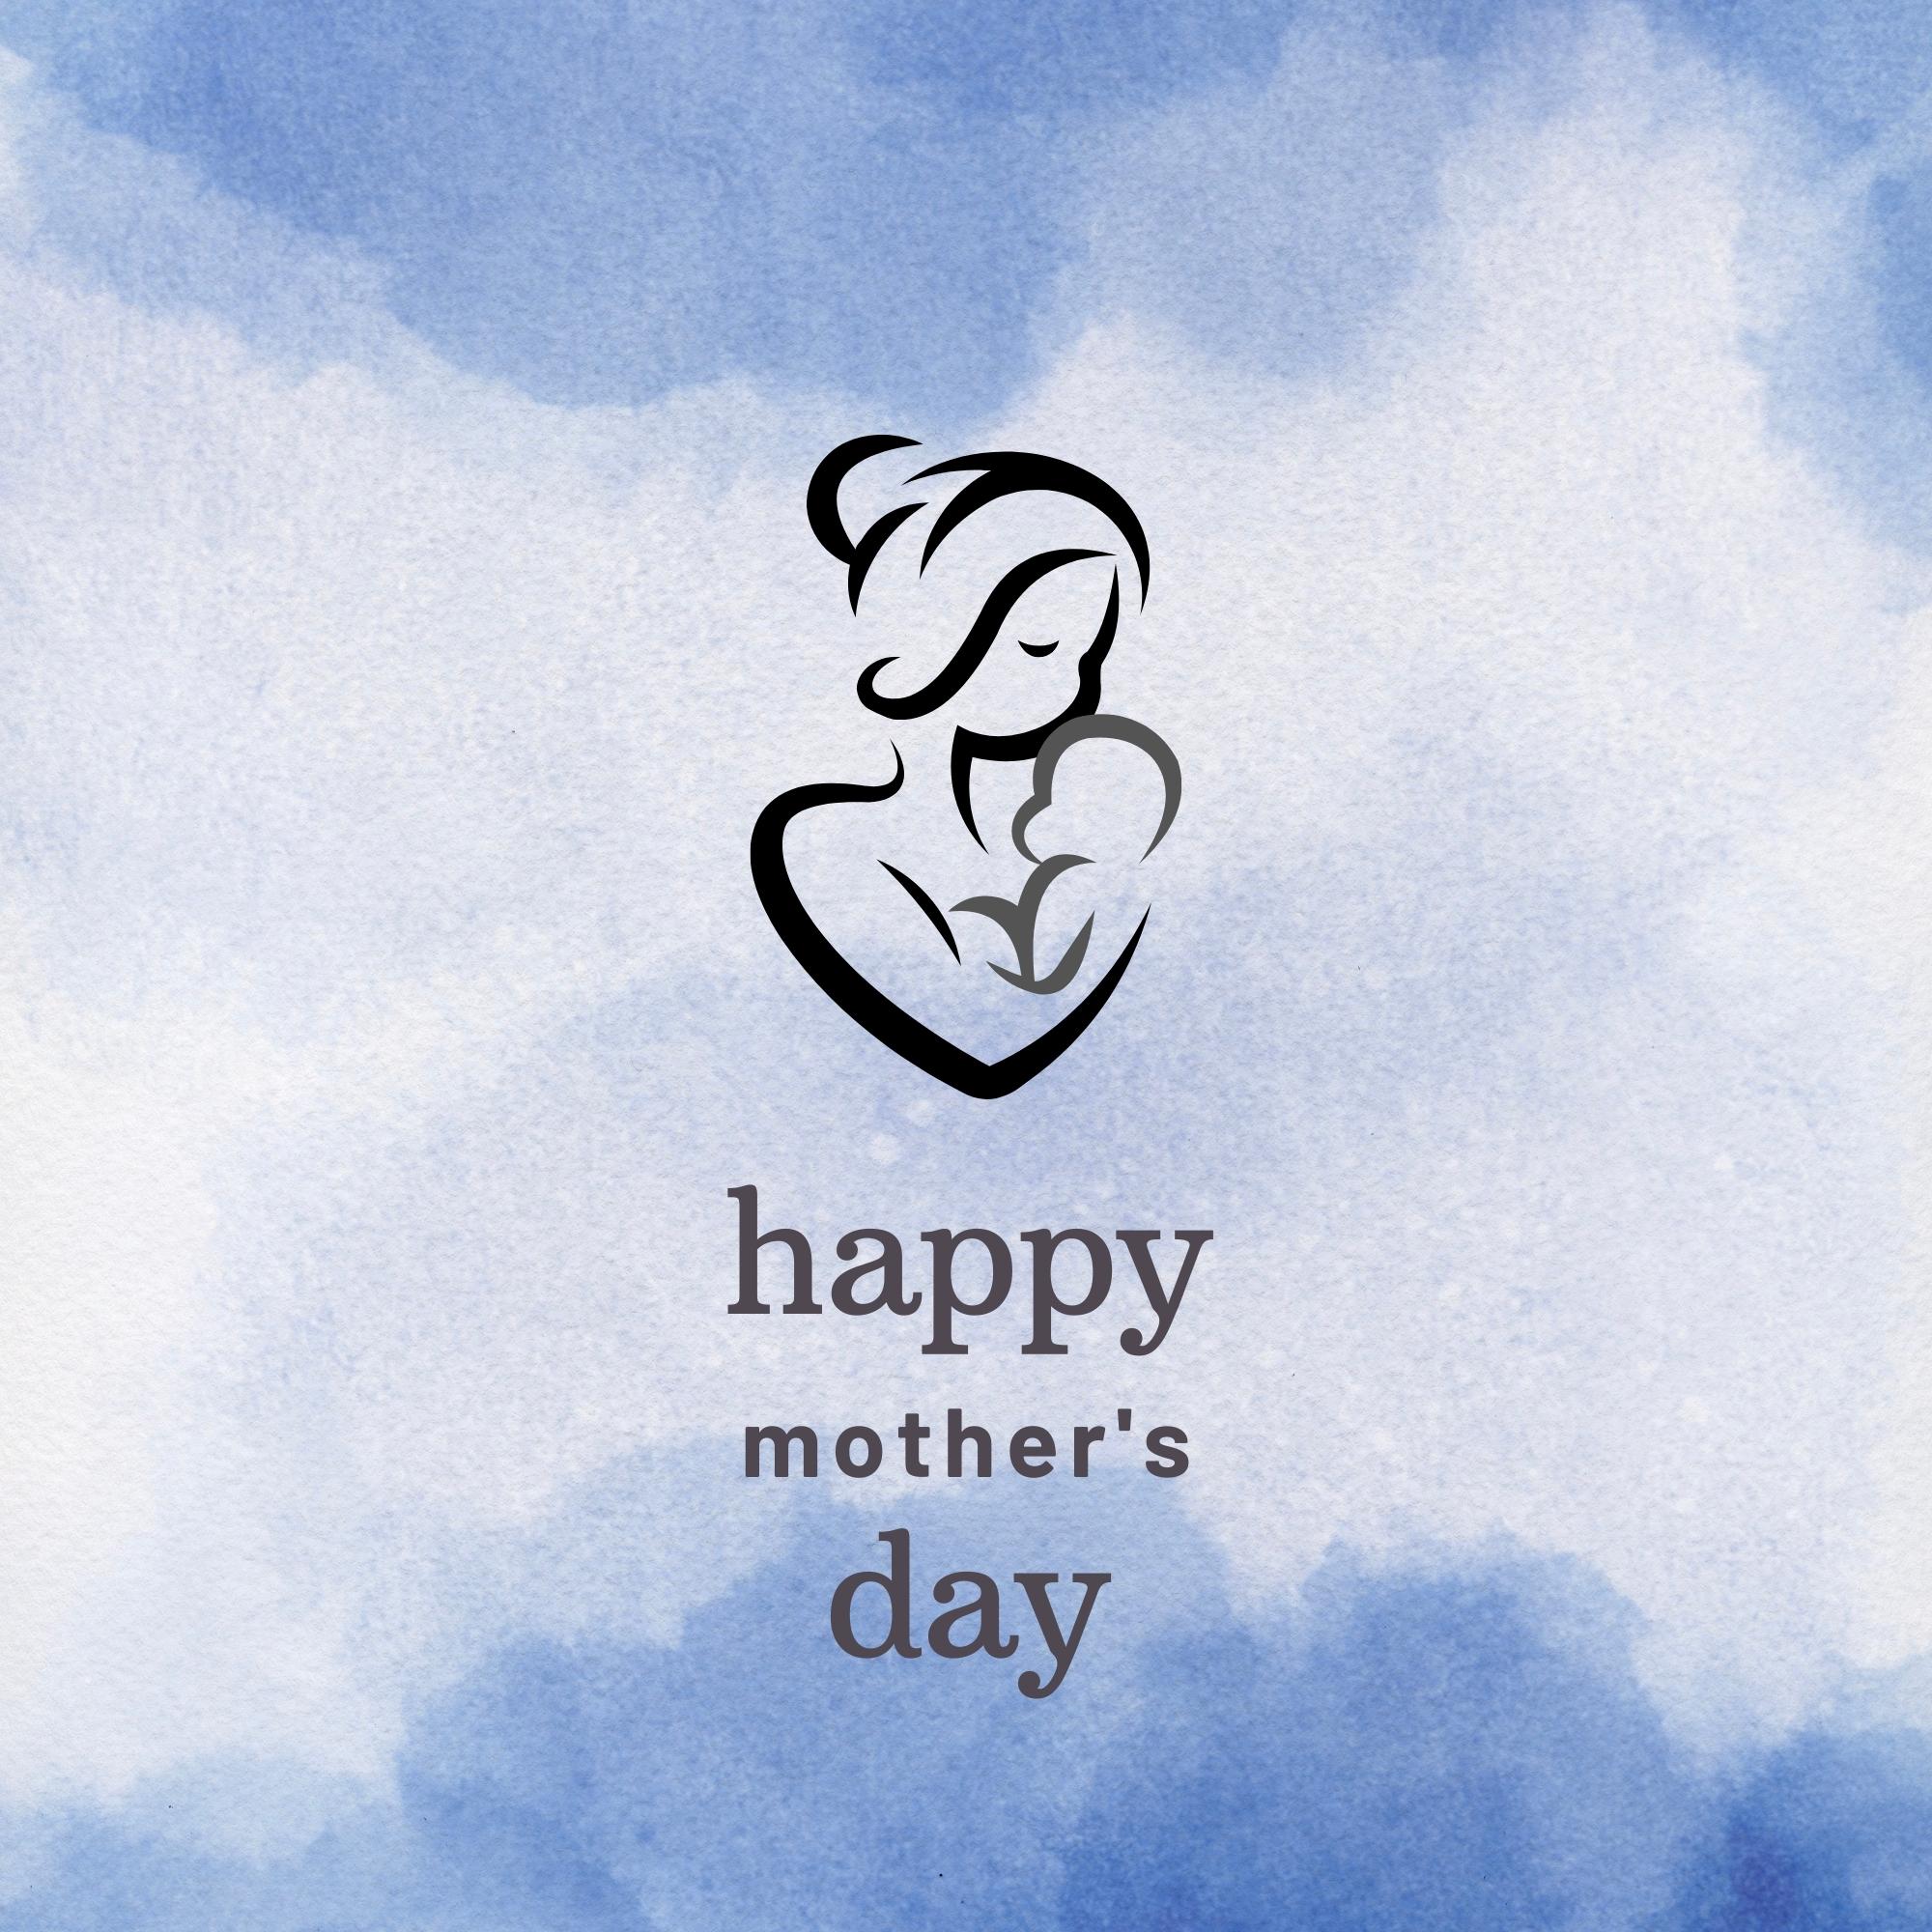 Happy Mothers Day Images | 1027 | Free Download [8k,4k,Hd]